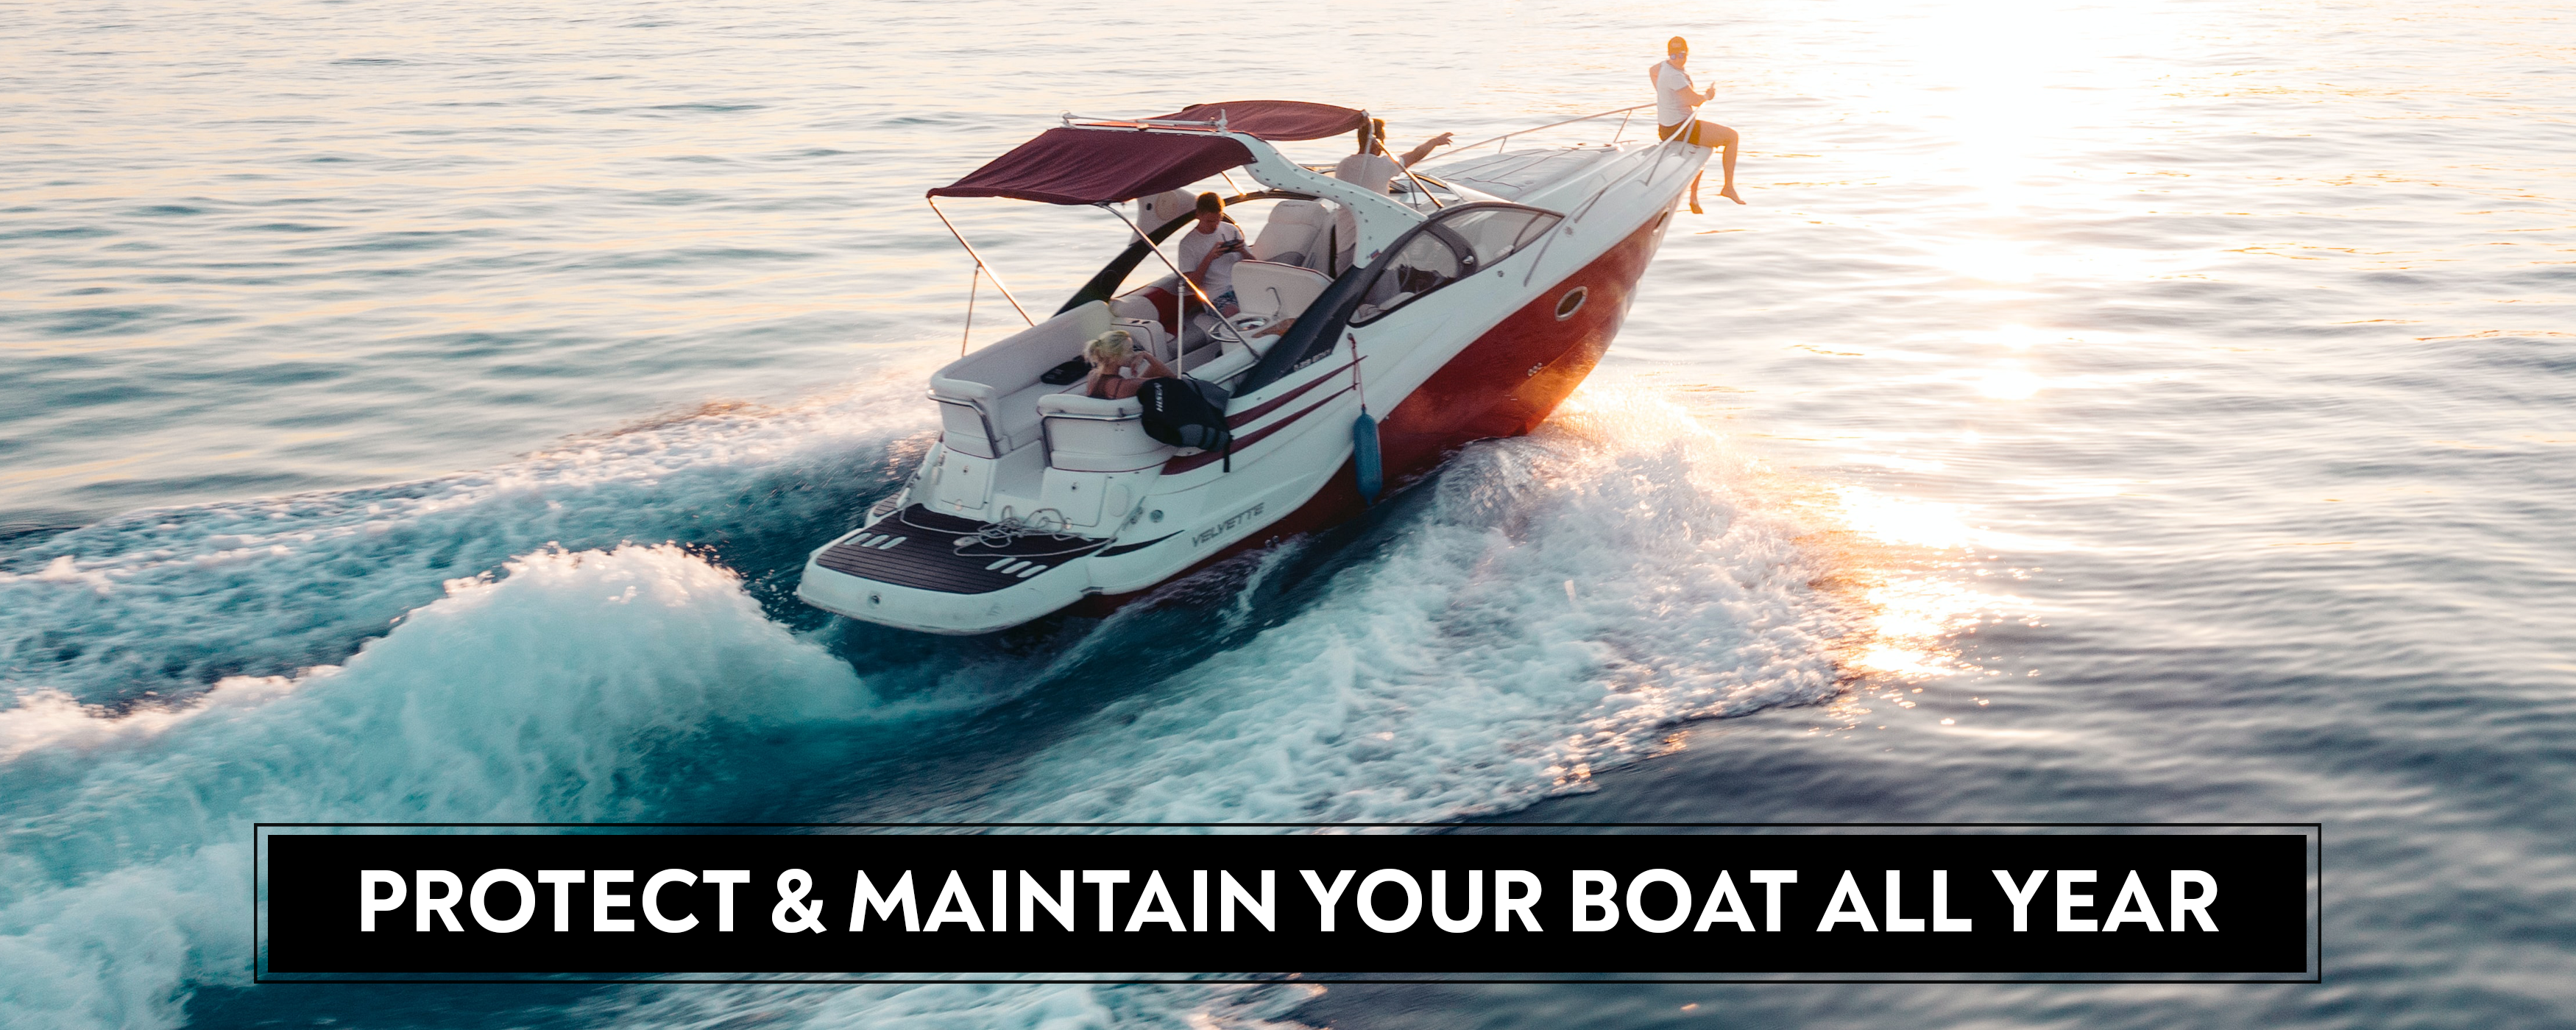 How To Protect and Maintain Your Boat All Year With TopCoat Products